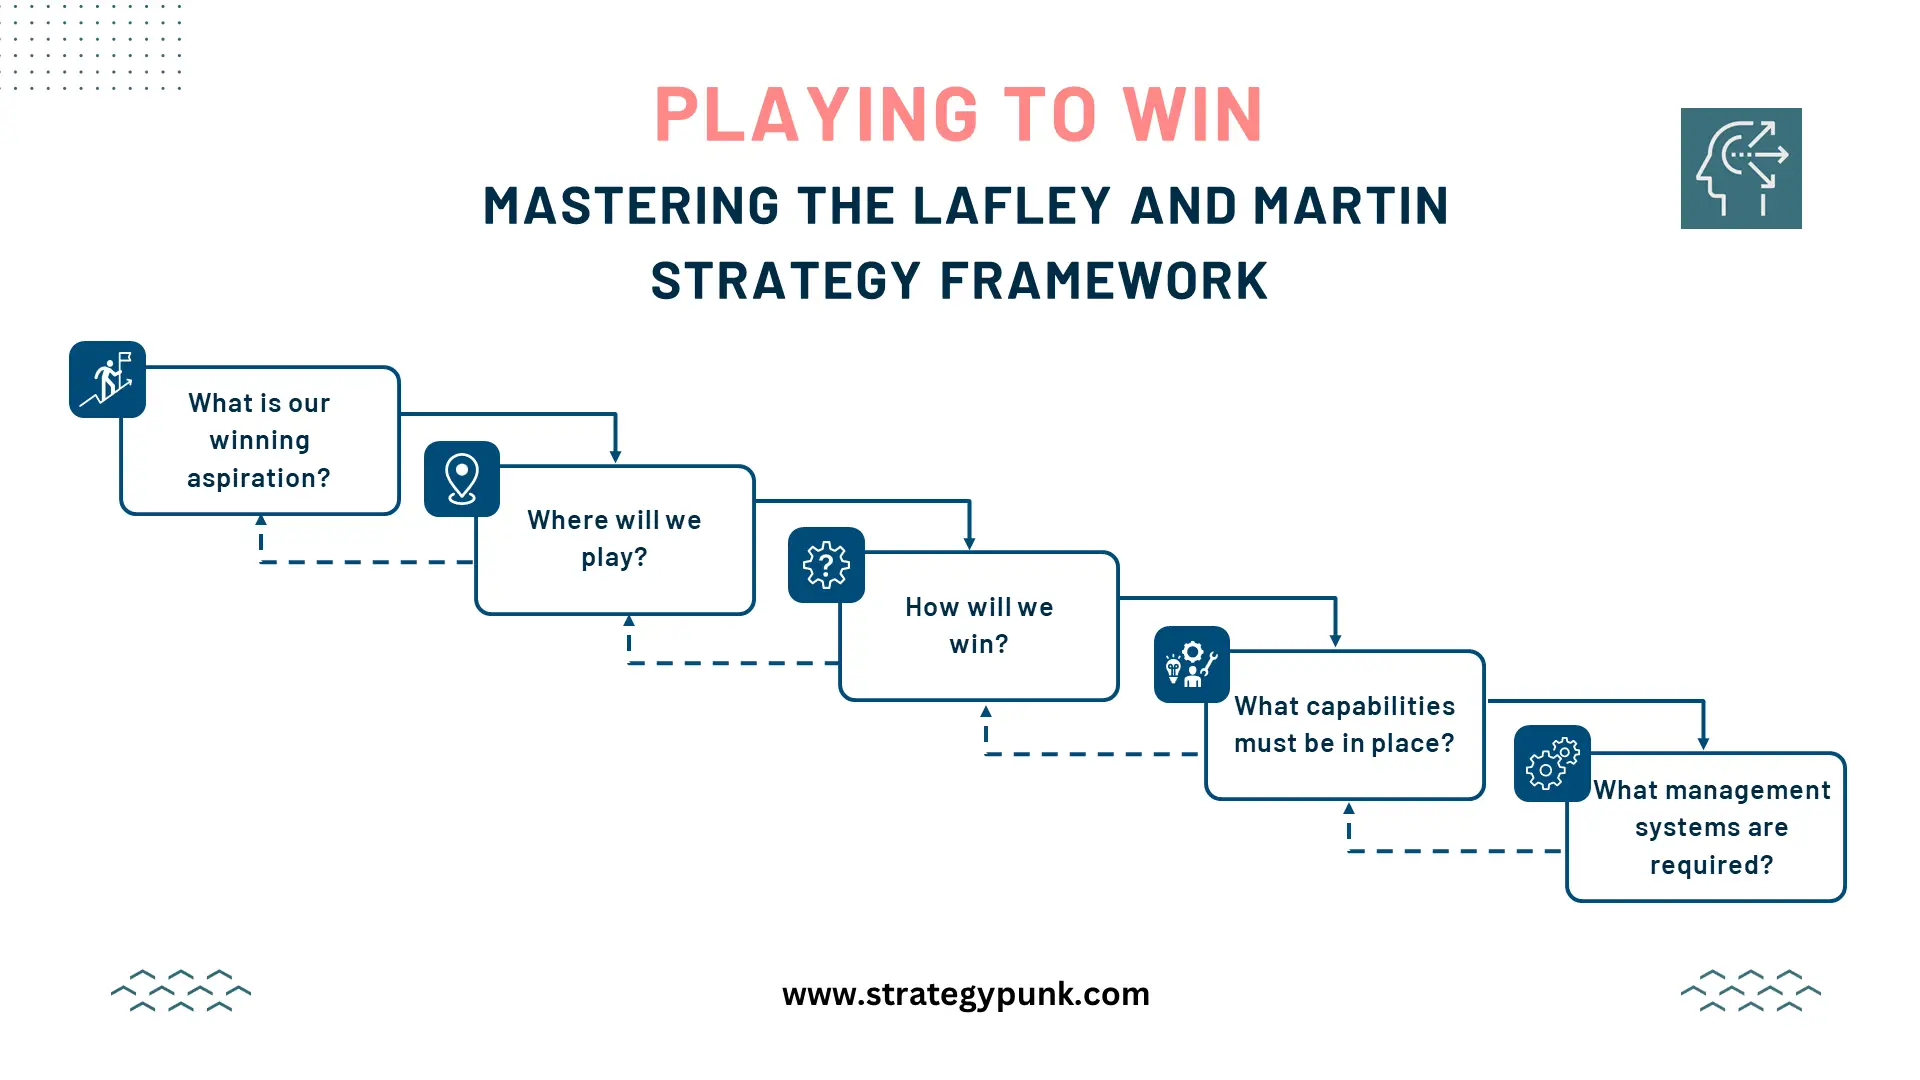 Playing To Win: Mastering the Lafley and Martin Strategy Framework